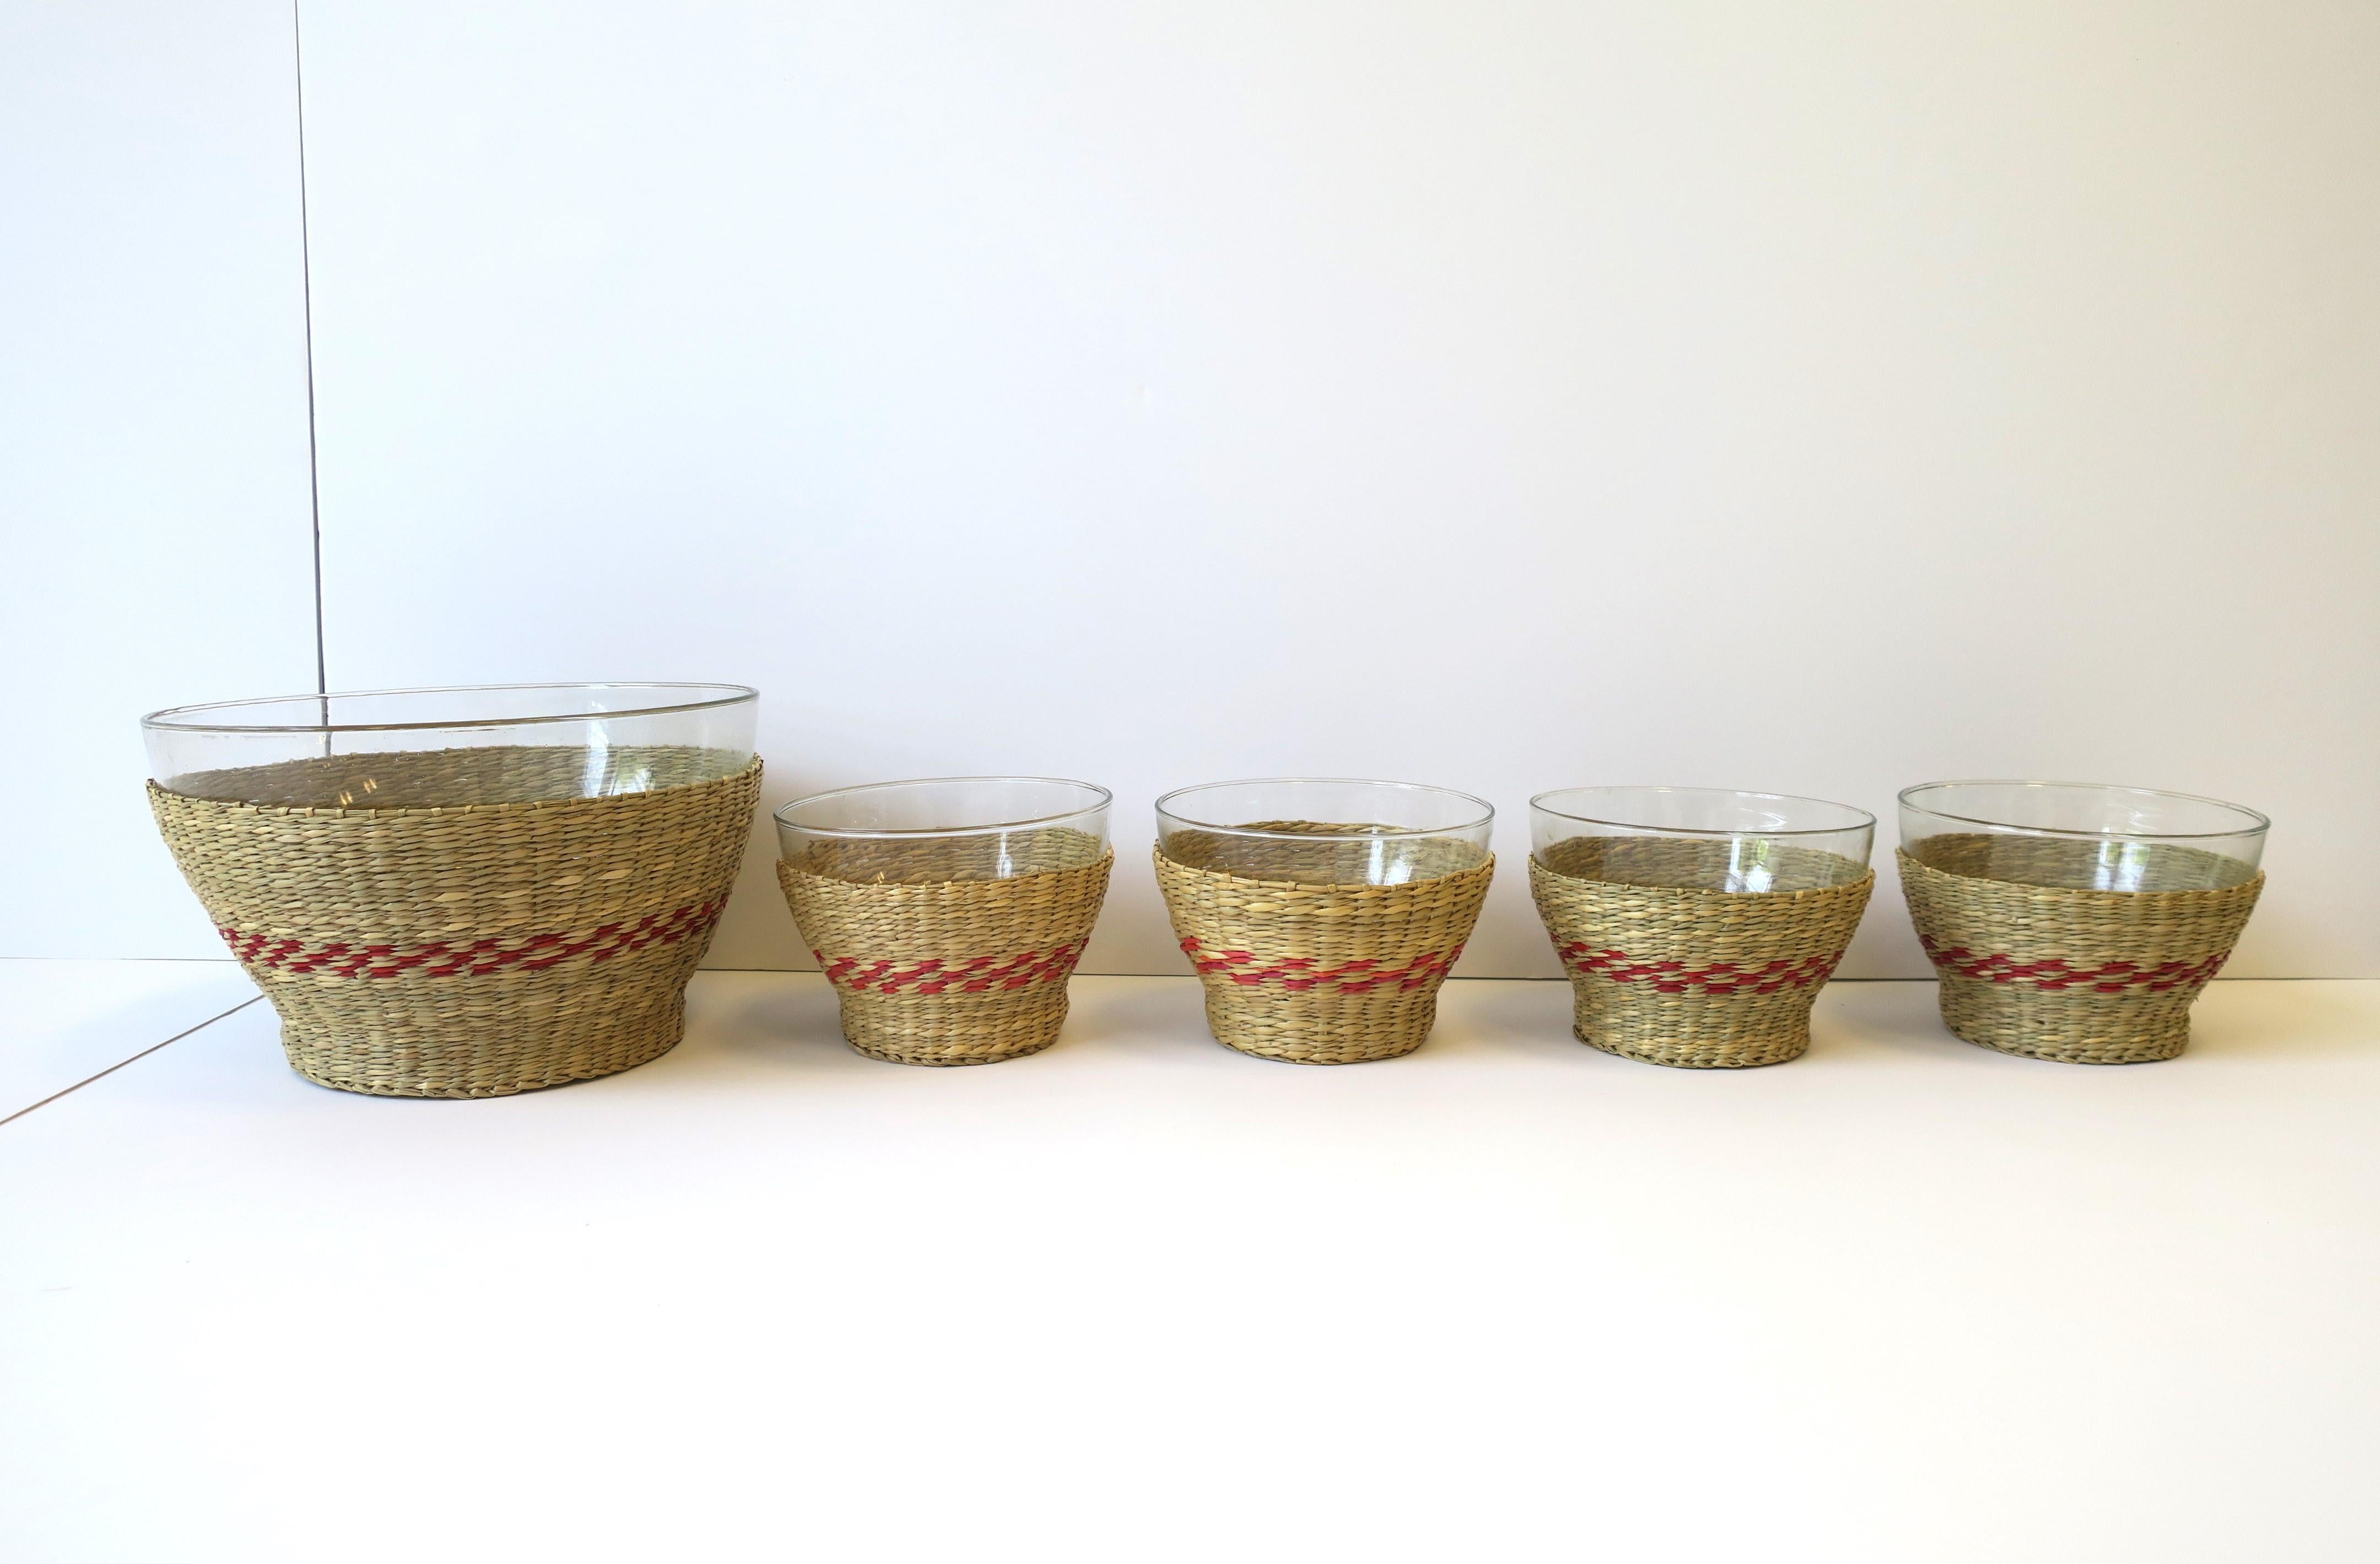 A wicker and glass bowl serving set. Set includes 1 large bowl and 4 smaller bowls, all embraced by a wicker 'basket' with red design around. Five (5) bowls in total. Great for everyday use or for entertaining, indoors or out. 

Dimensions: